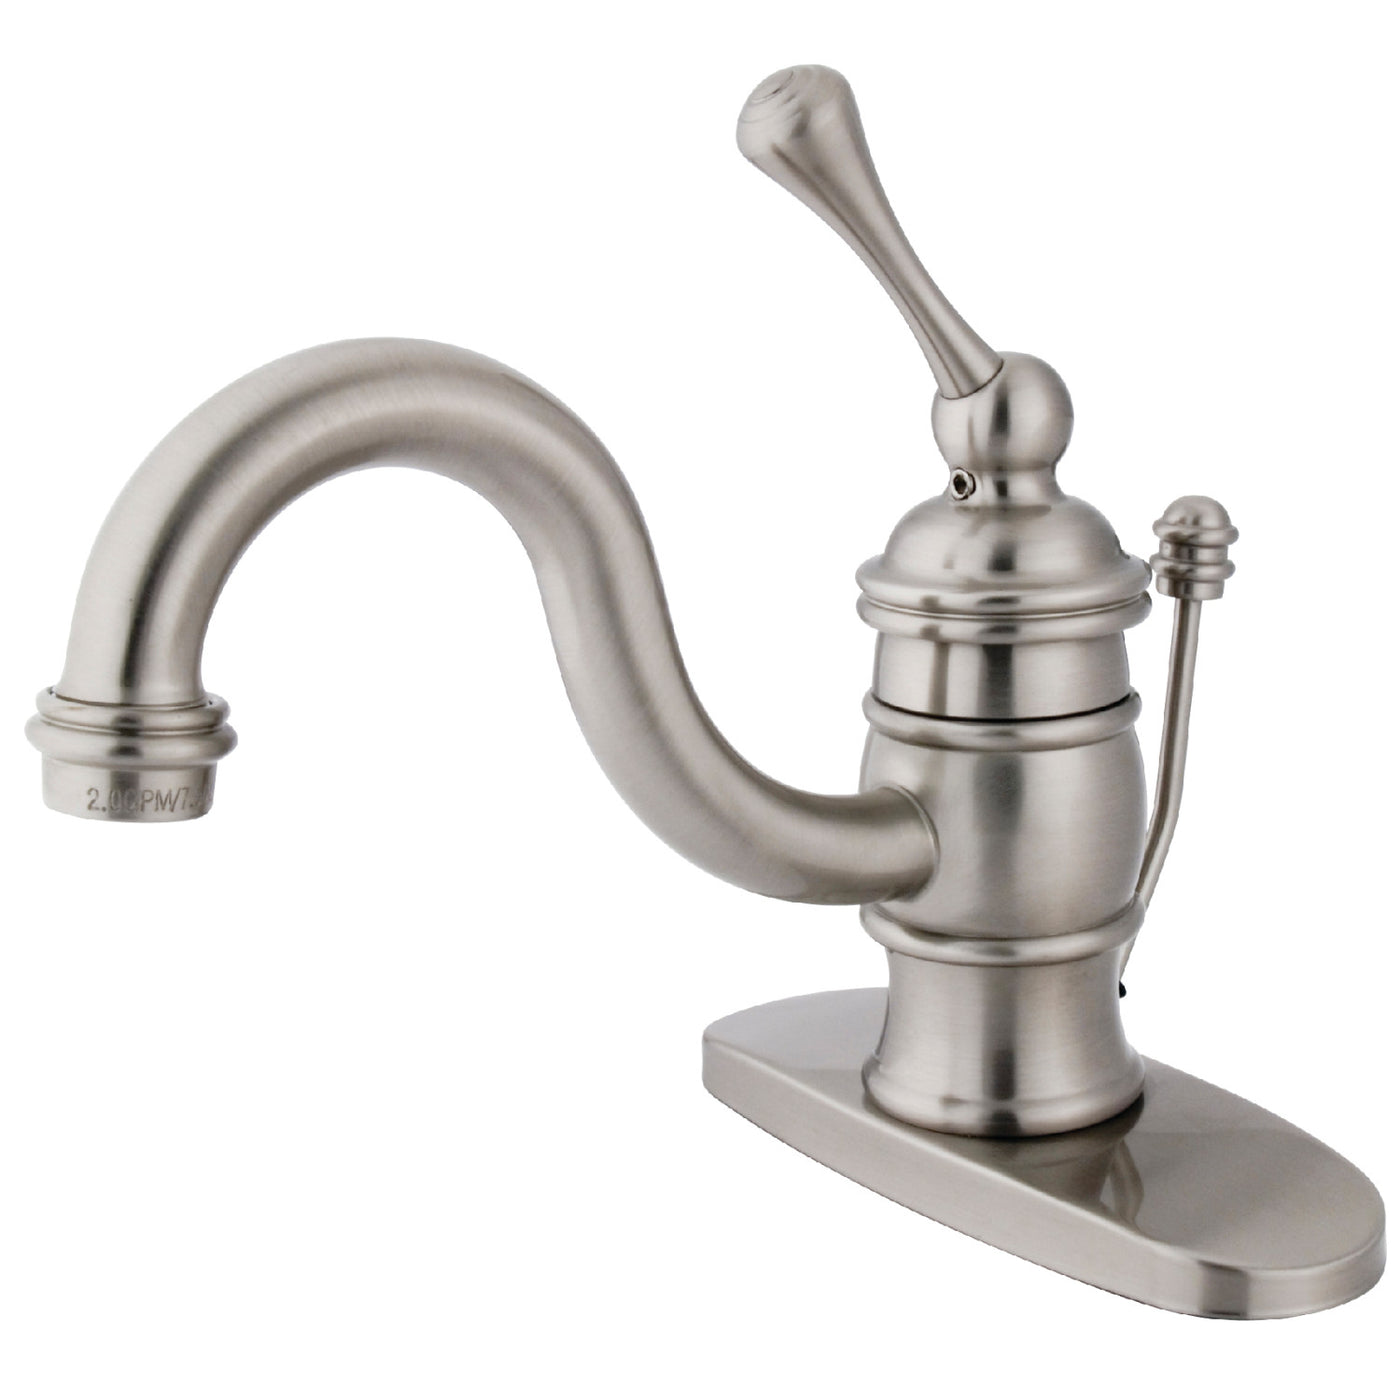 Elements of Design EB3408BL Single-Handle Bathroom Faucet with Pop-Up Drain, Brushed Nickel